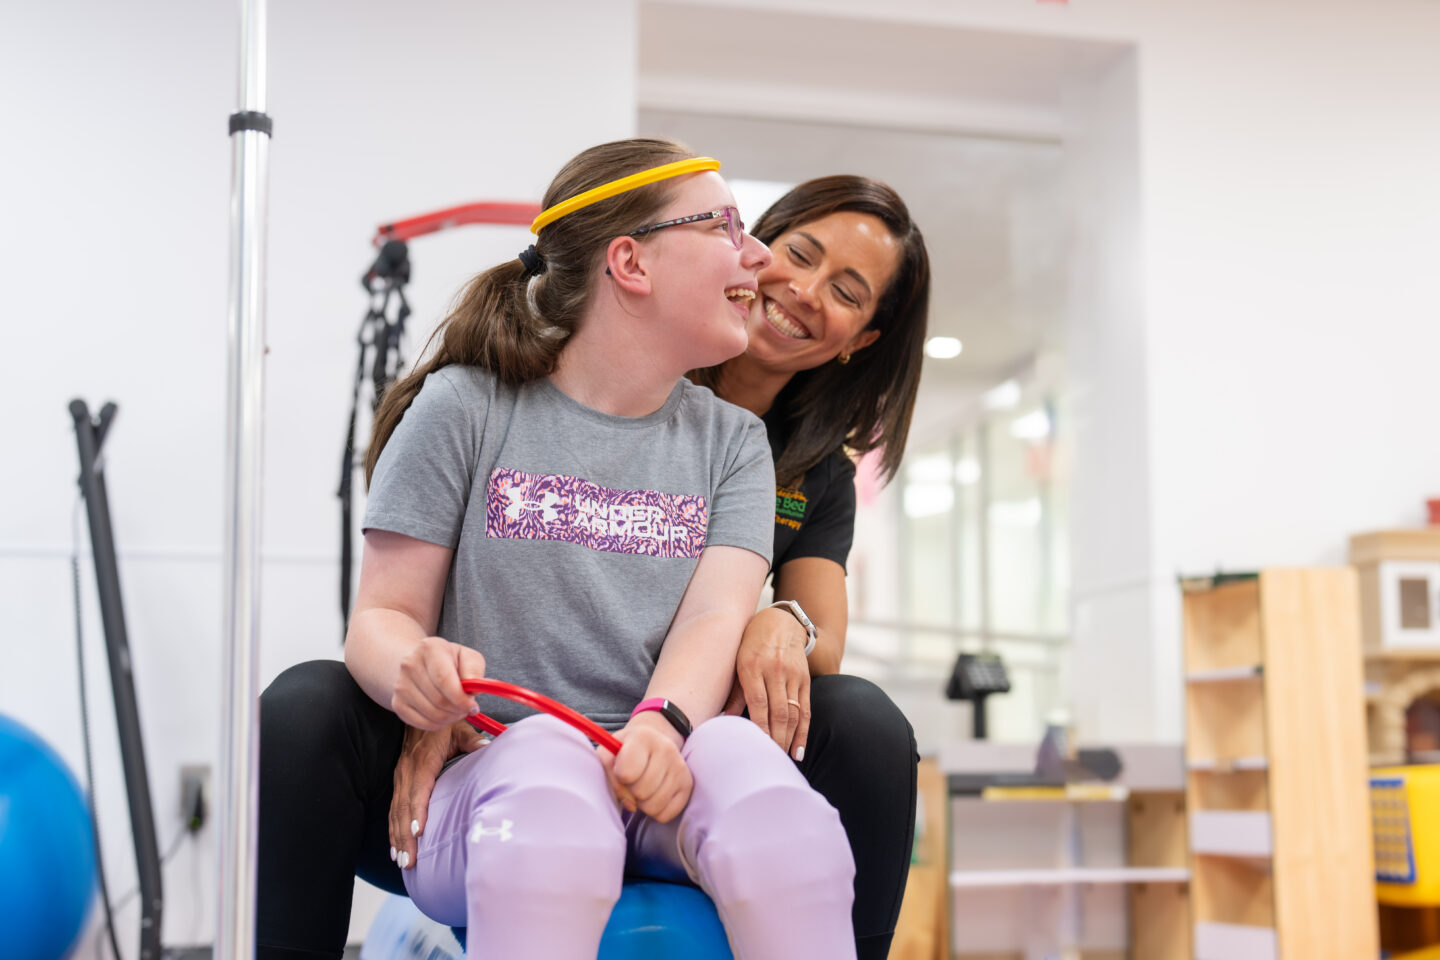 Loralei smiles at physical therapist during a therapy session with her physical therapist